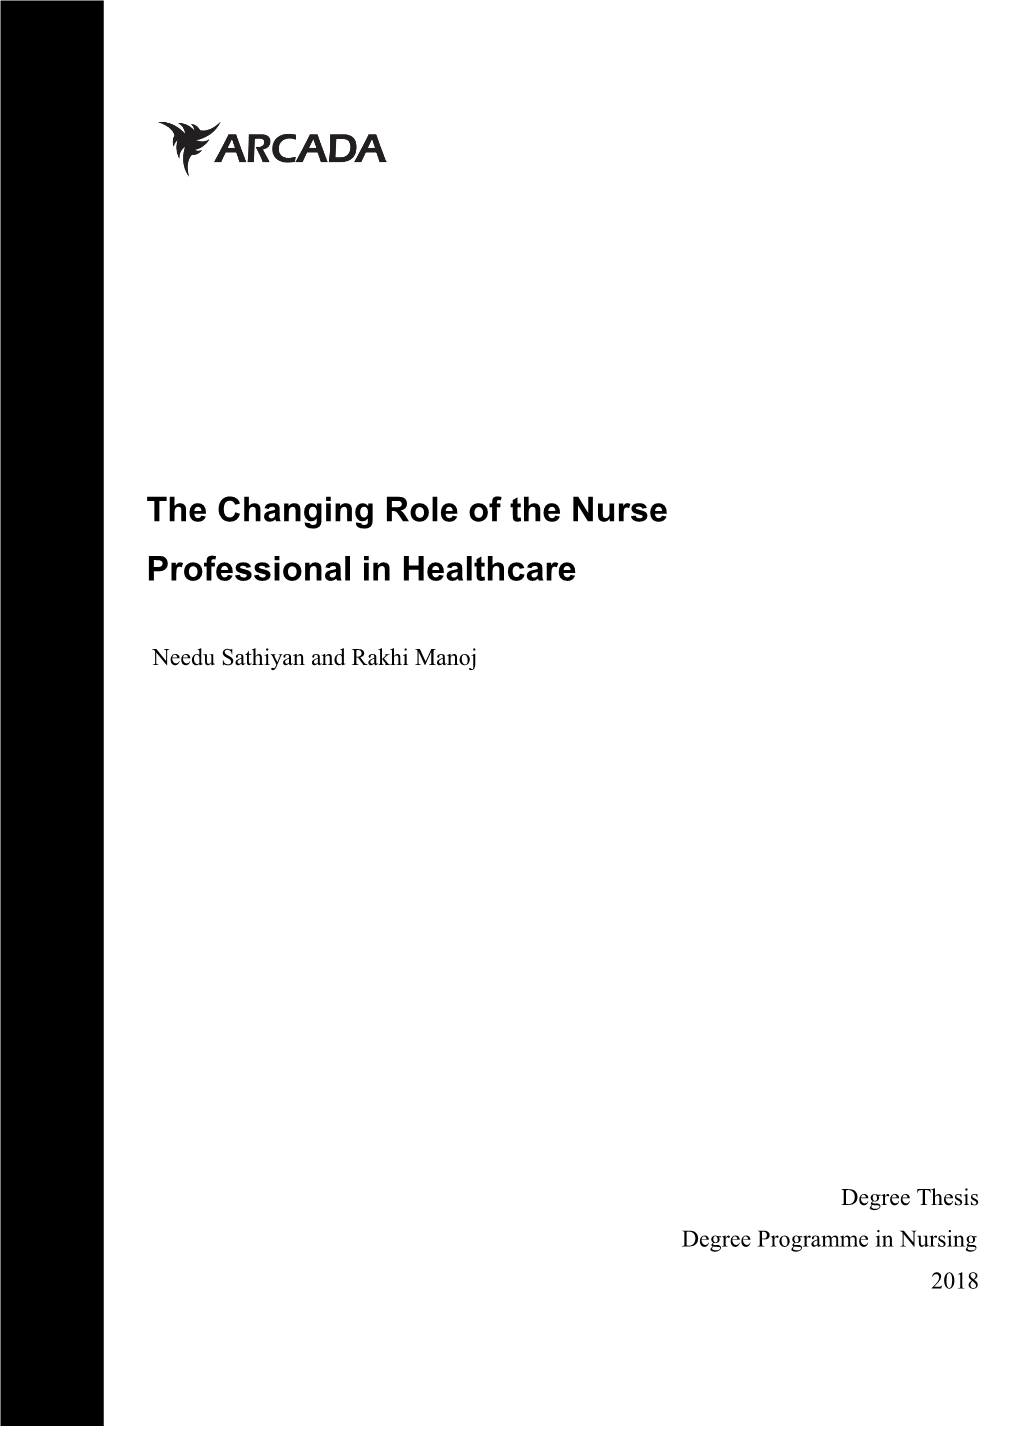 The Changing Role of the Nurse Professional in Healthcare